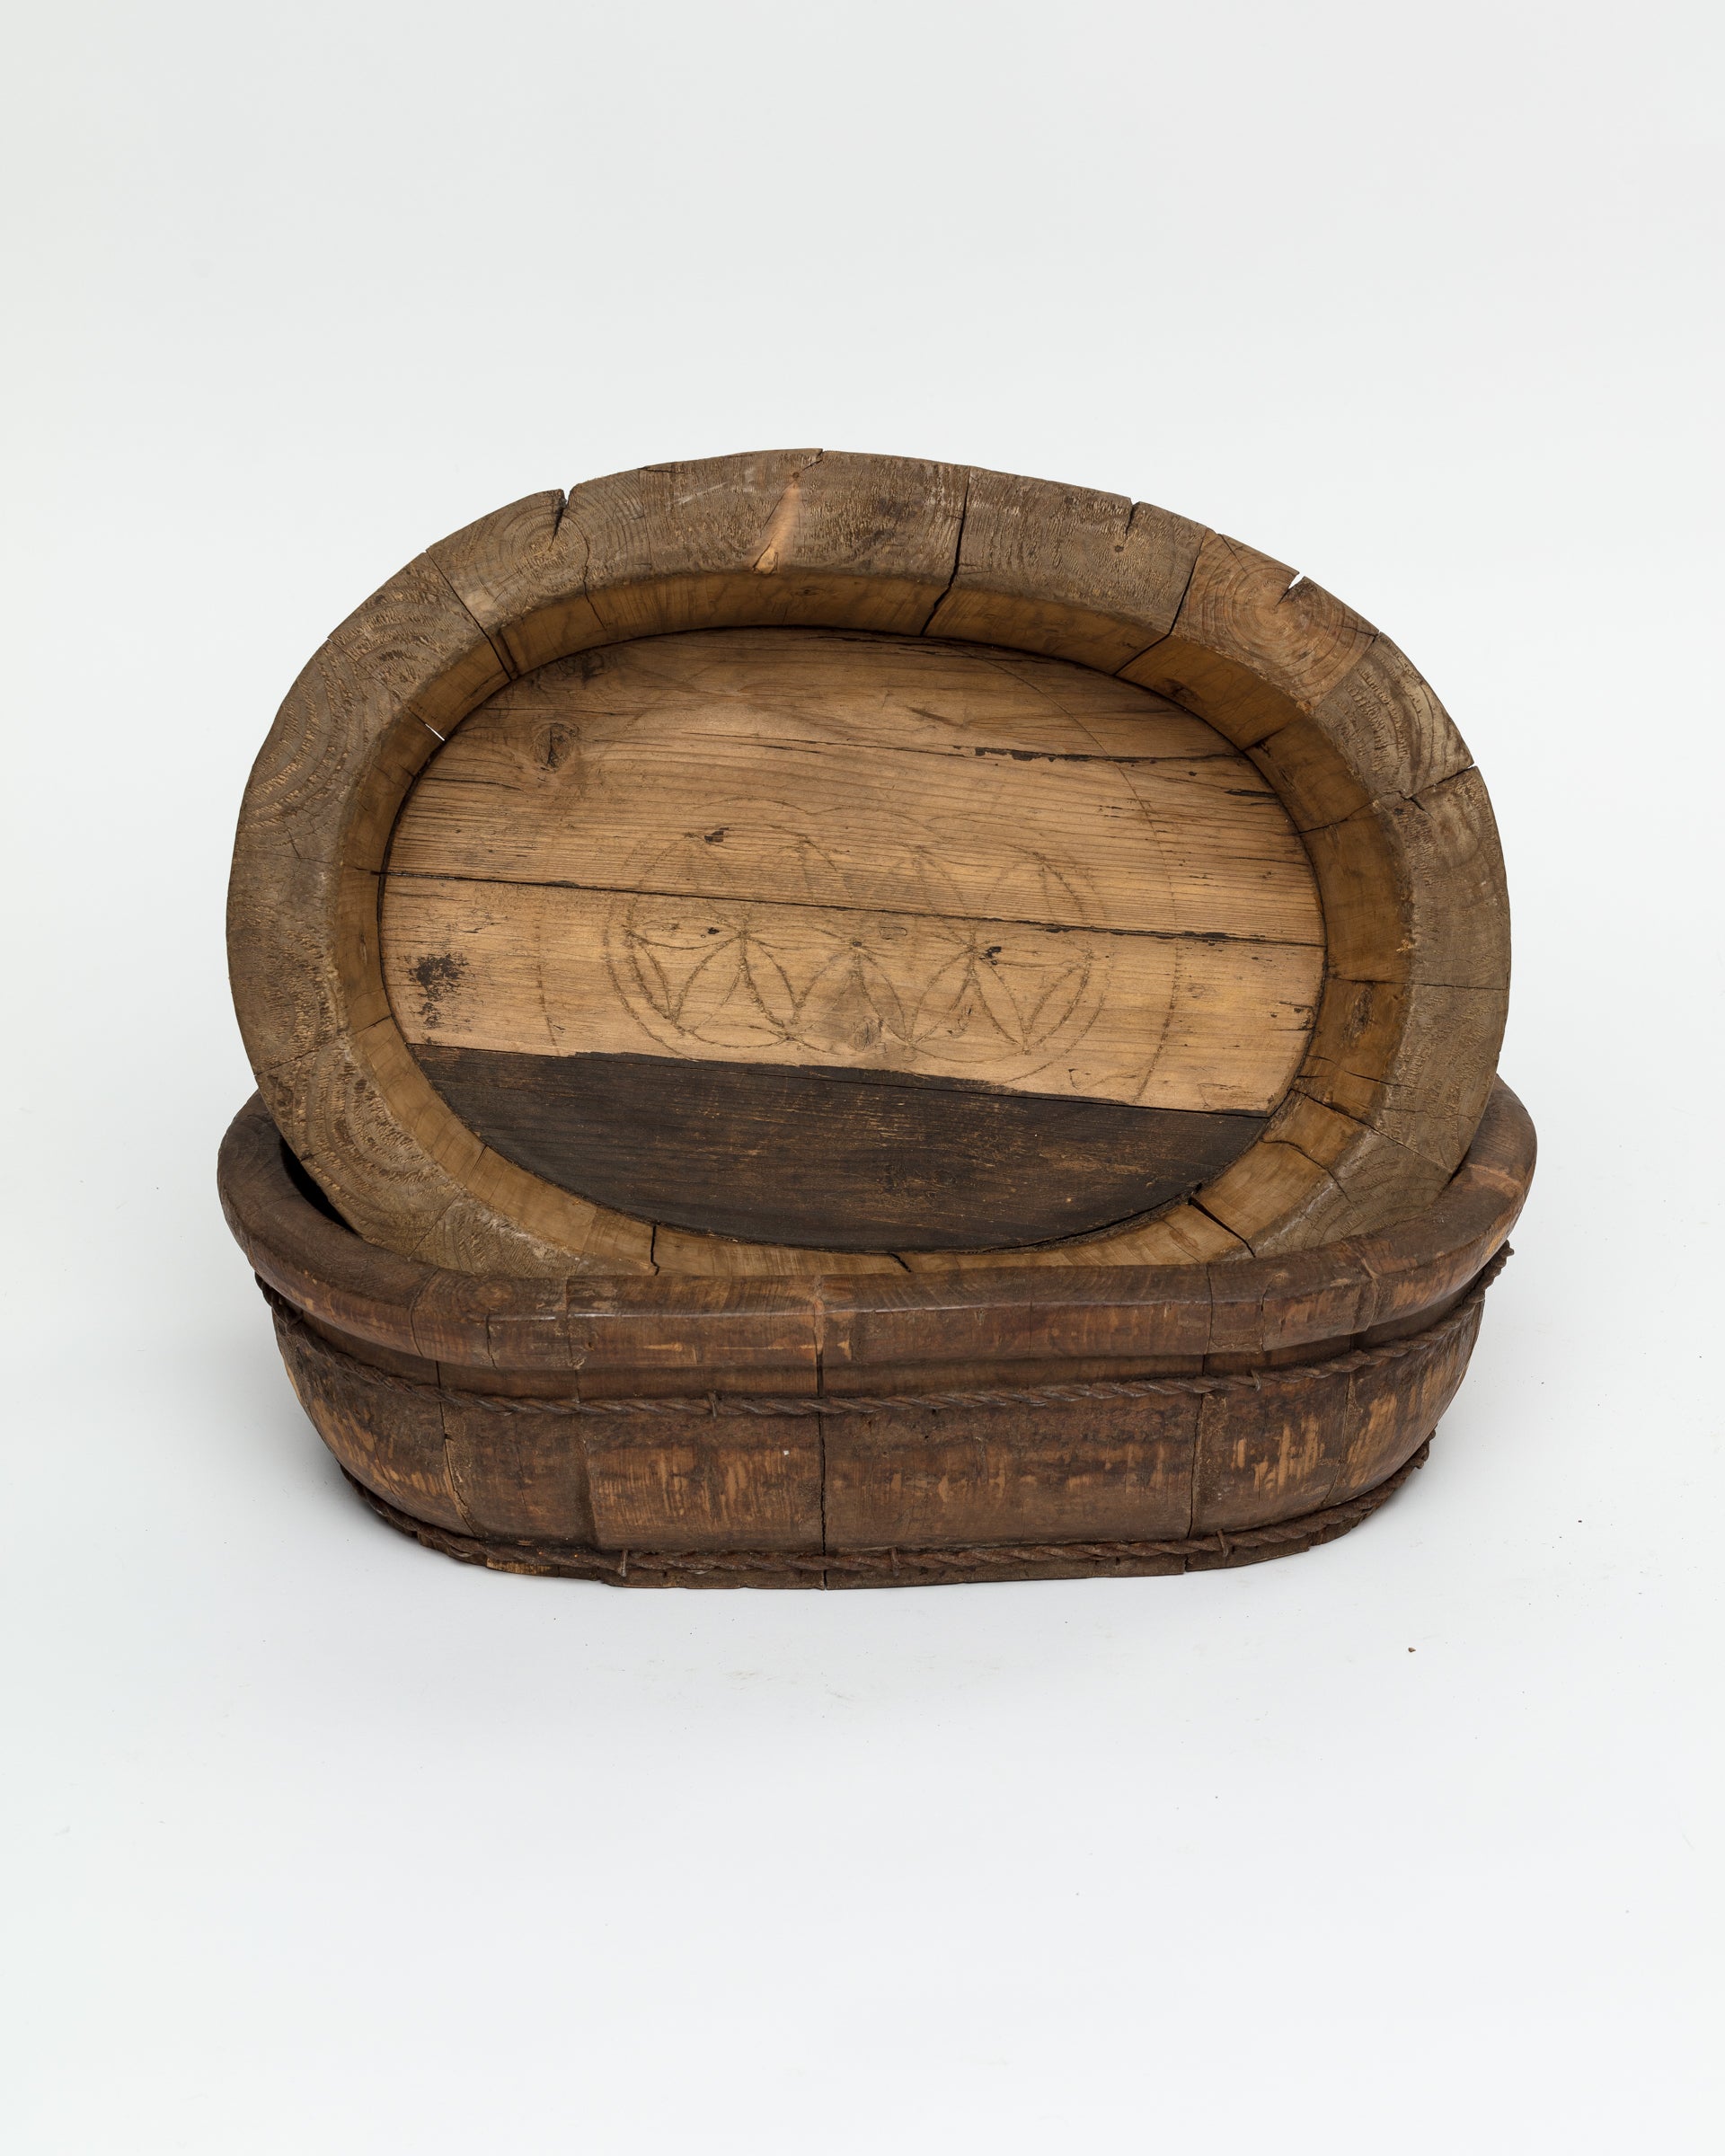 An oval-shaped, vintage Oval Wood Bucket 10 from a Scottsdale Arizona bungalow with visible wear and carved patterns on a plain white background. Brand: Indus Design Imports.